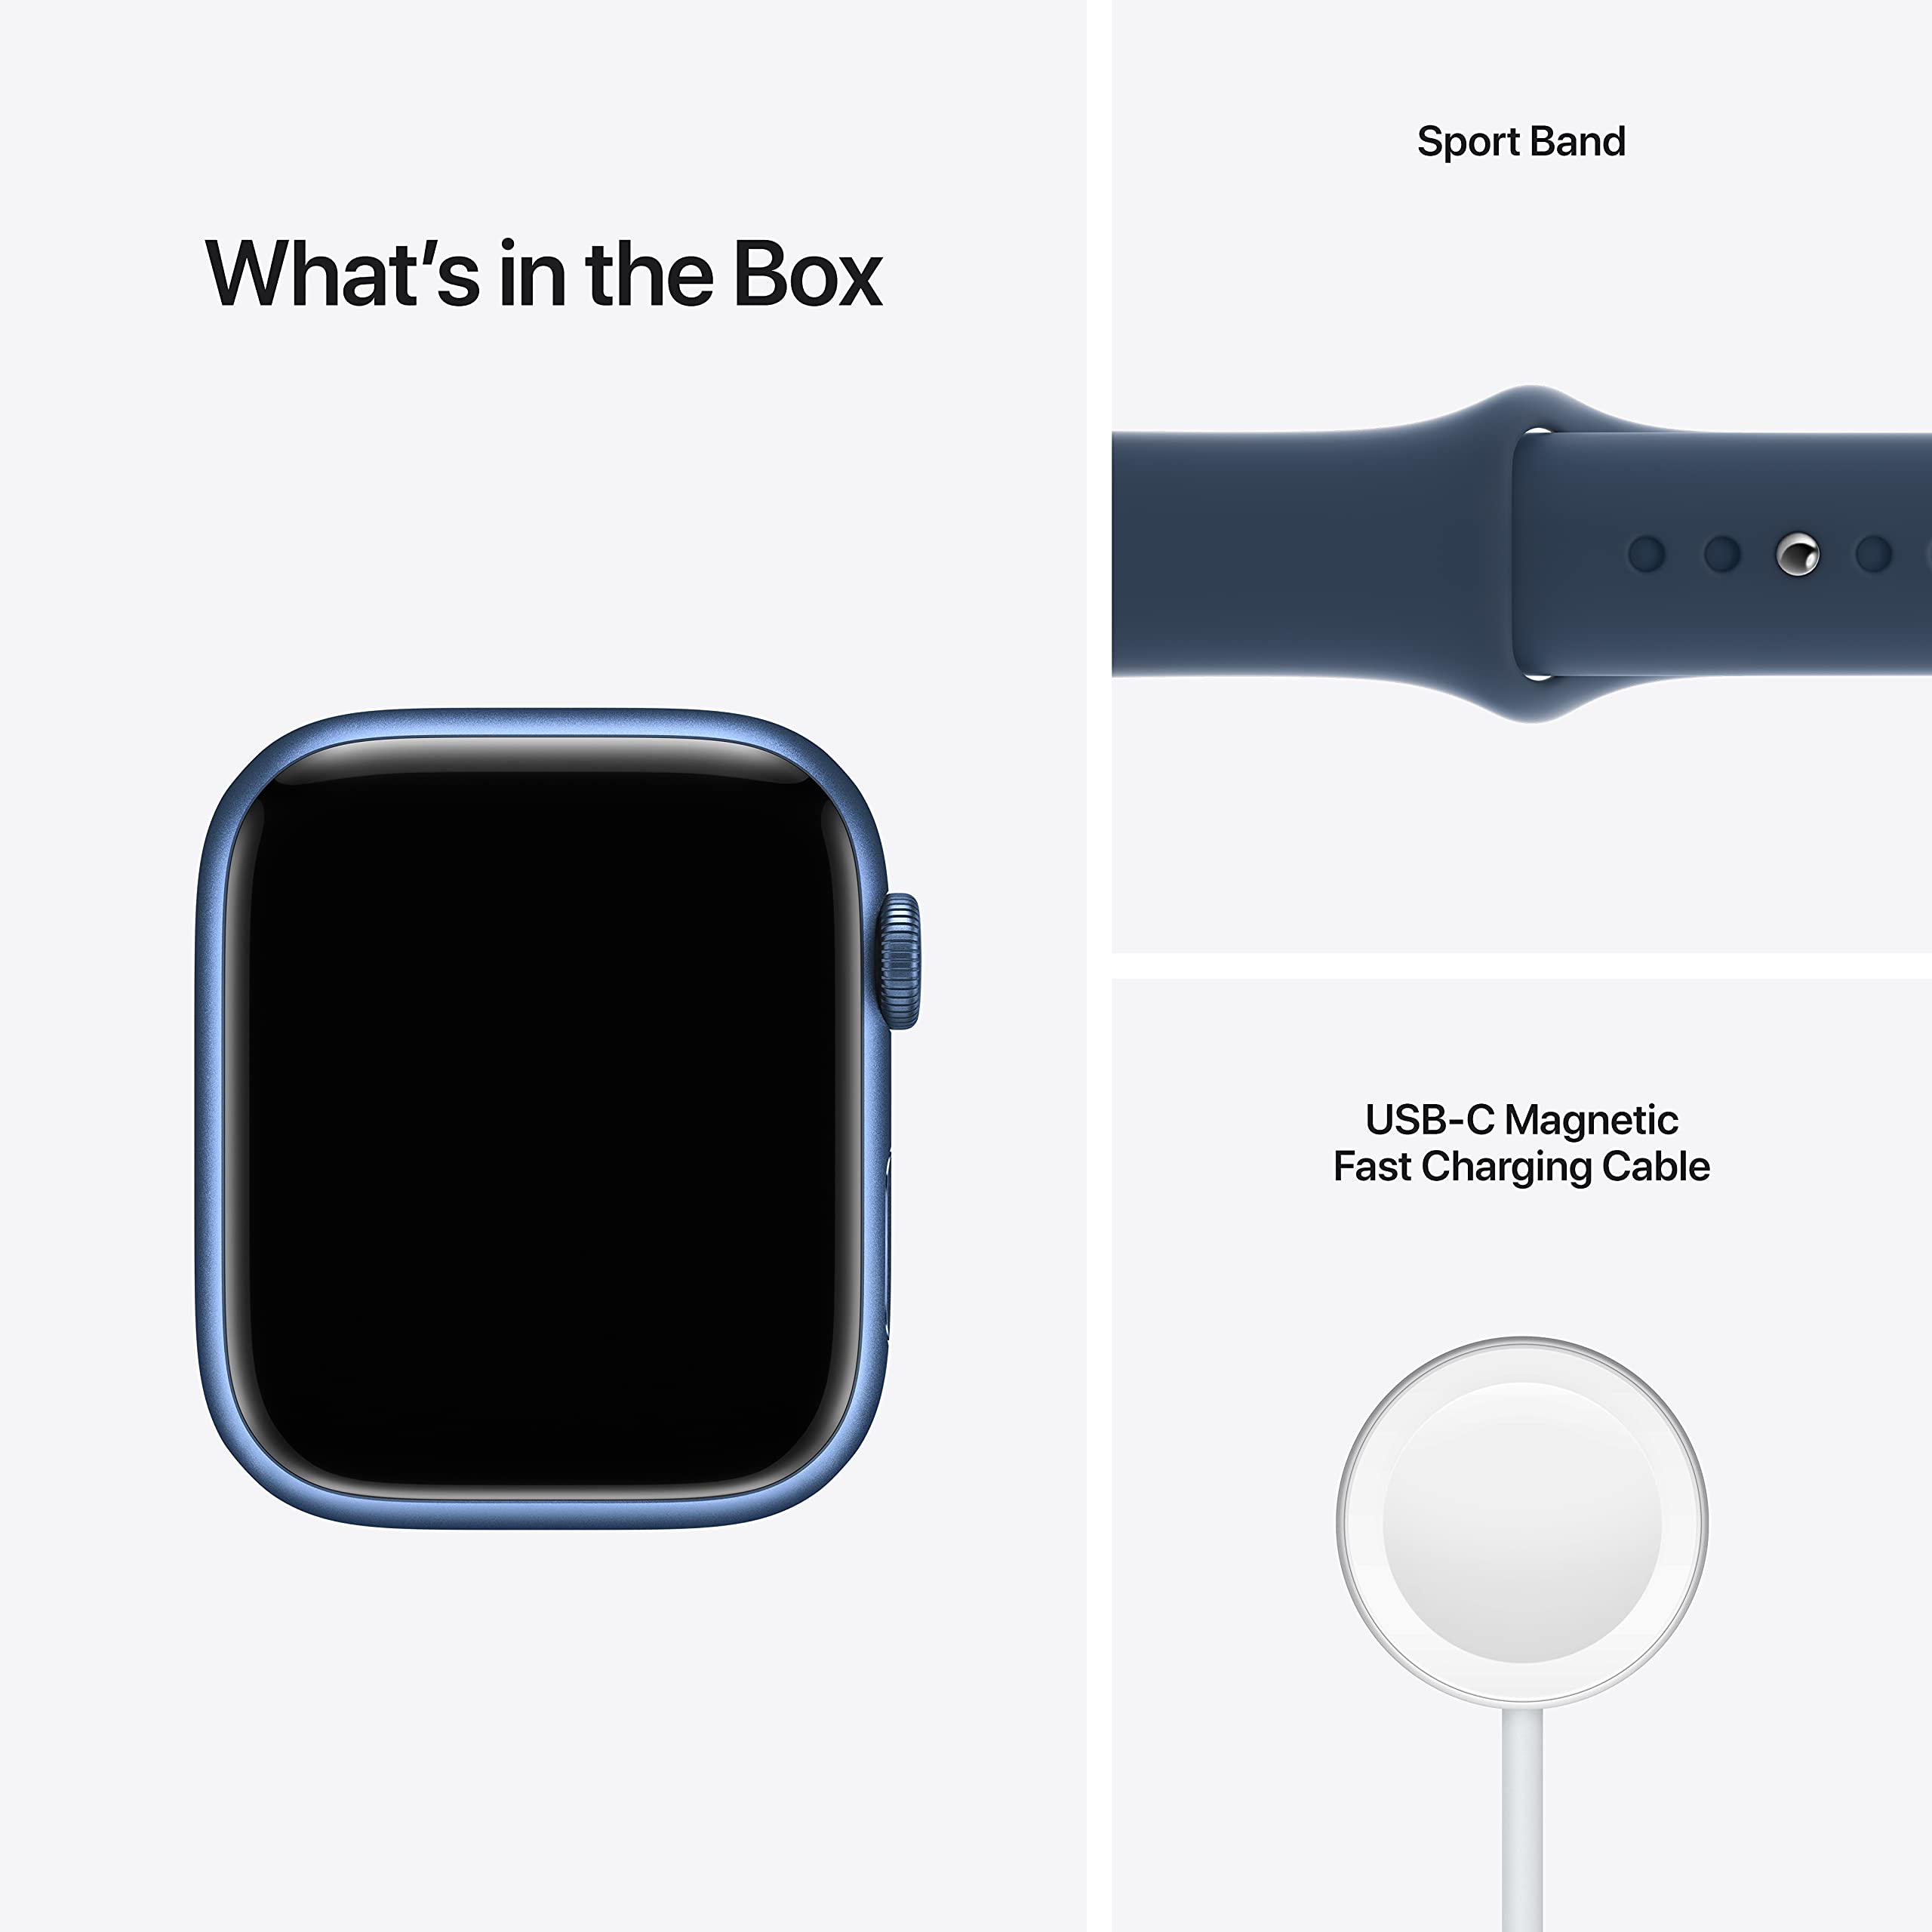 Apple Watch Series 7 [GPS + Cellular 45mm] Smart Watch w/Blue Aluminum Case with Abyss Blue Sport Band. Fitness Tracker, Blood Oxygen & ECG Apps, Always-On Retina Display, Water Resistant